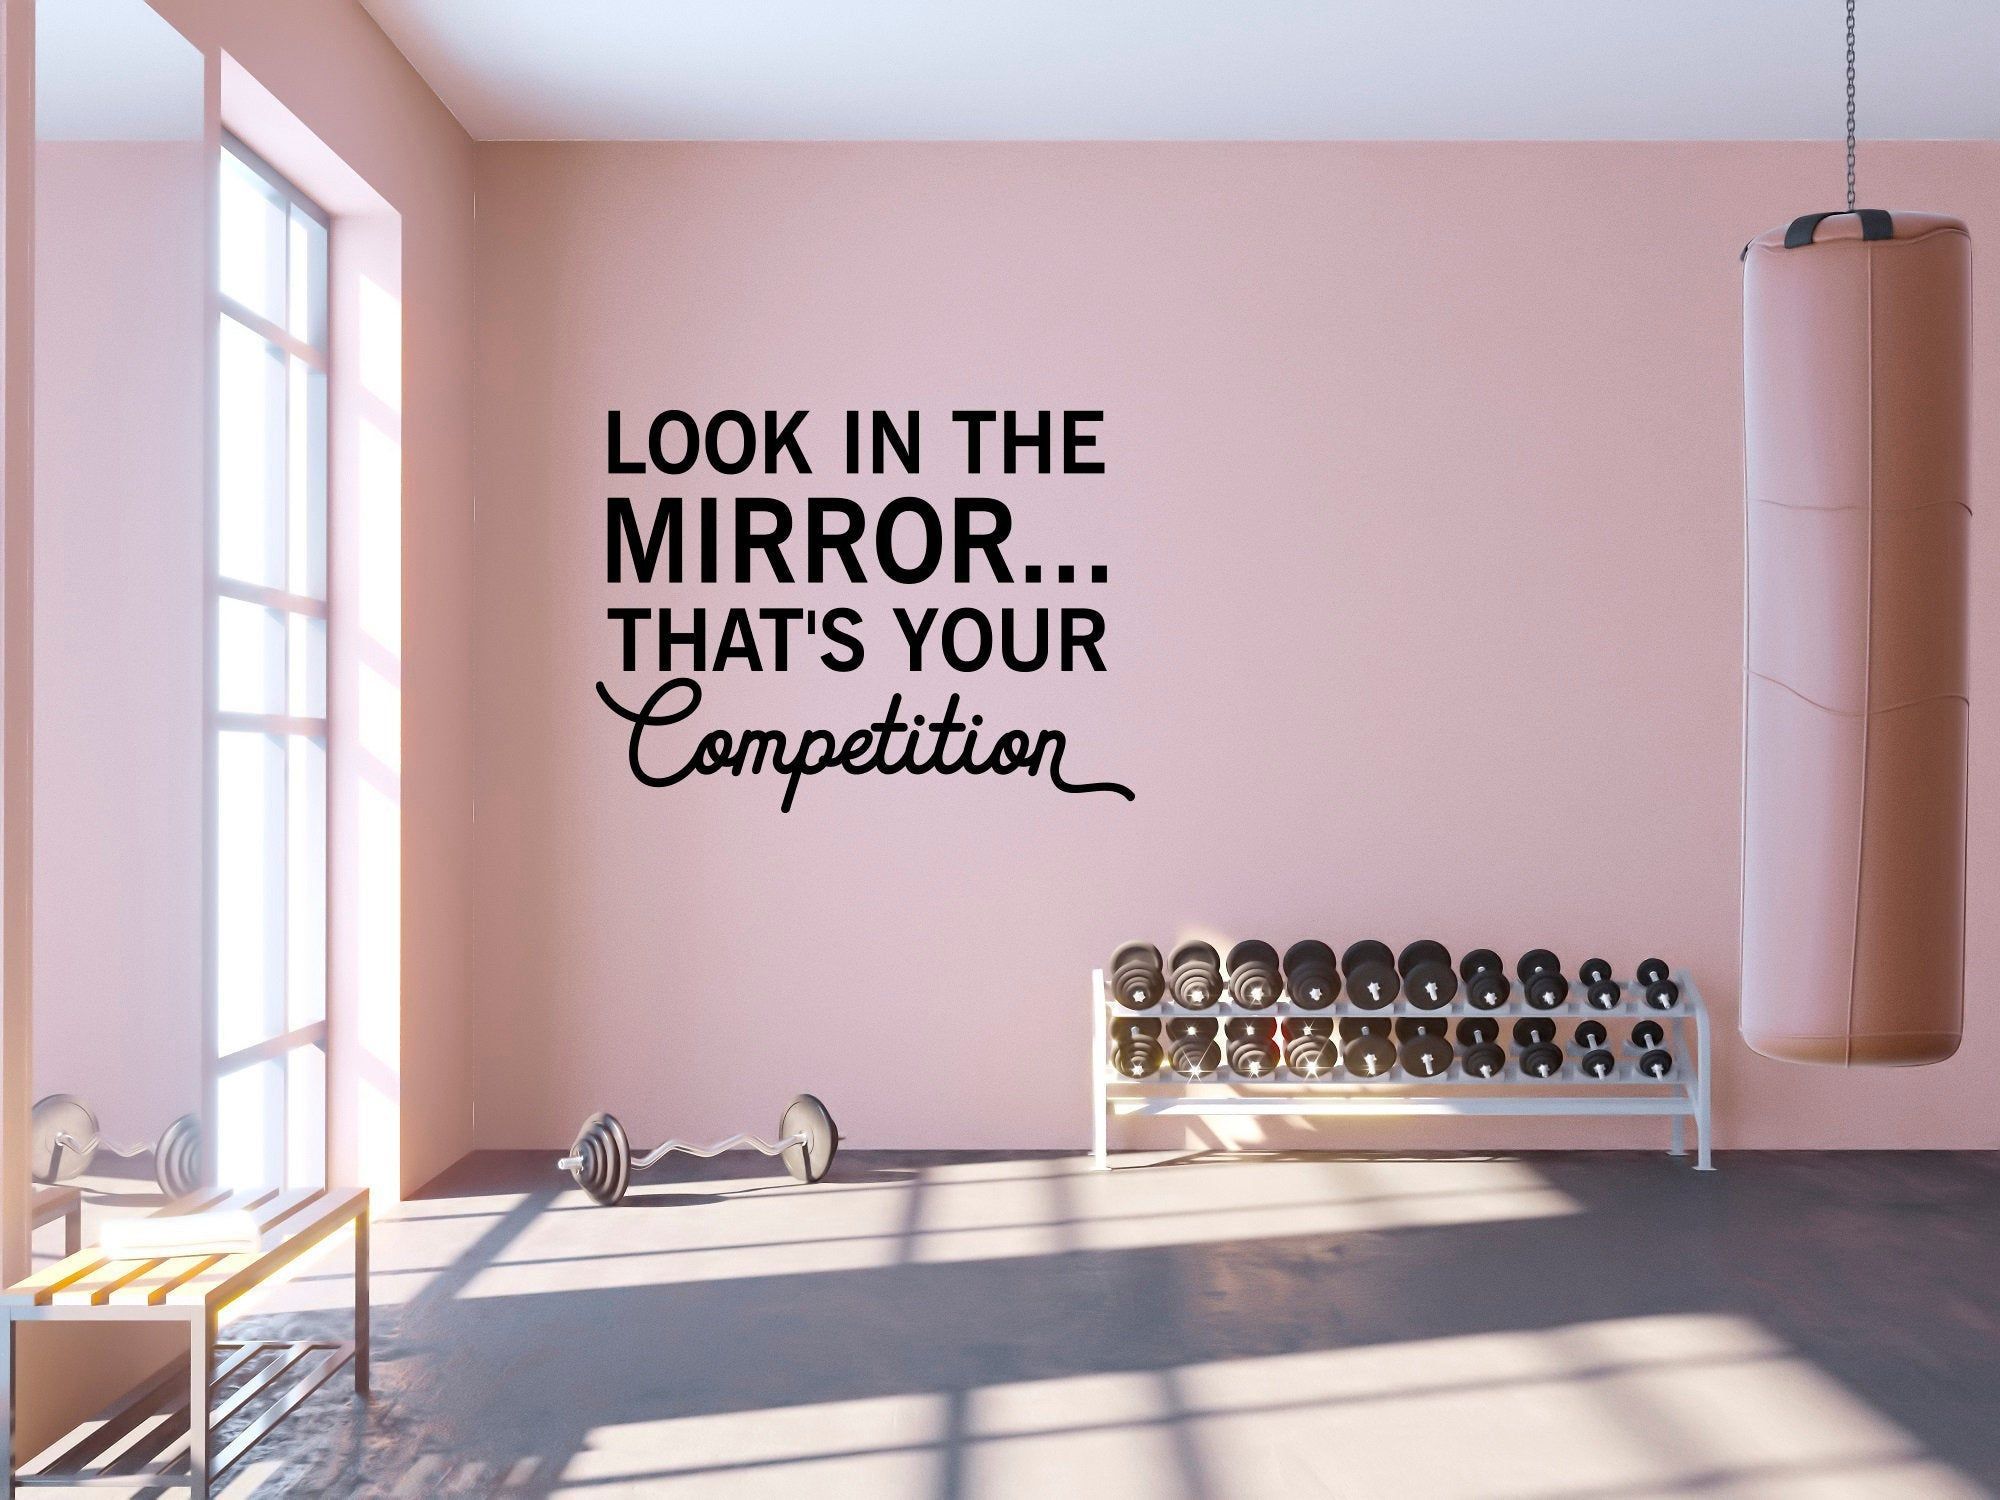 Look in the Mirror...That's Your Competition Quote Wall Decal - Sport Vinyl Stickers, Motivational Gym Decal, Fitness Quote Wall Decal SB155 - Look in the Mirror...That's Your Competition Quote Wall Decal - Sport Vinyl Stickers, Motivational Gym Decal, Fitness Quote Wall Decal SB155 -   14 fitness Room photography ideas